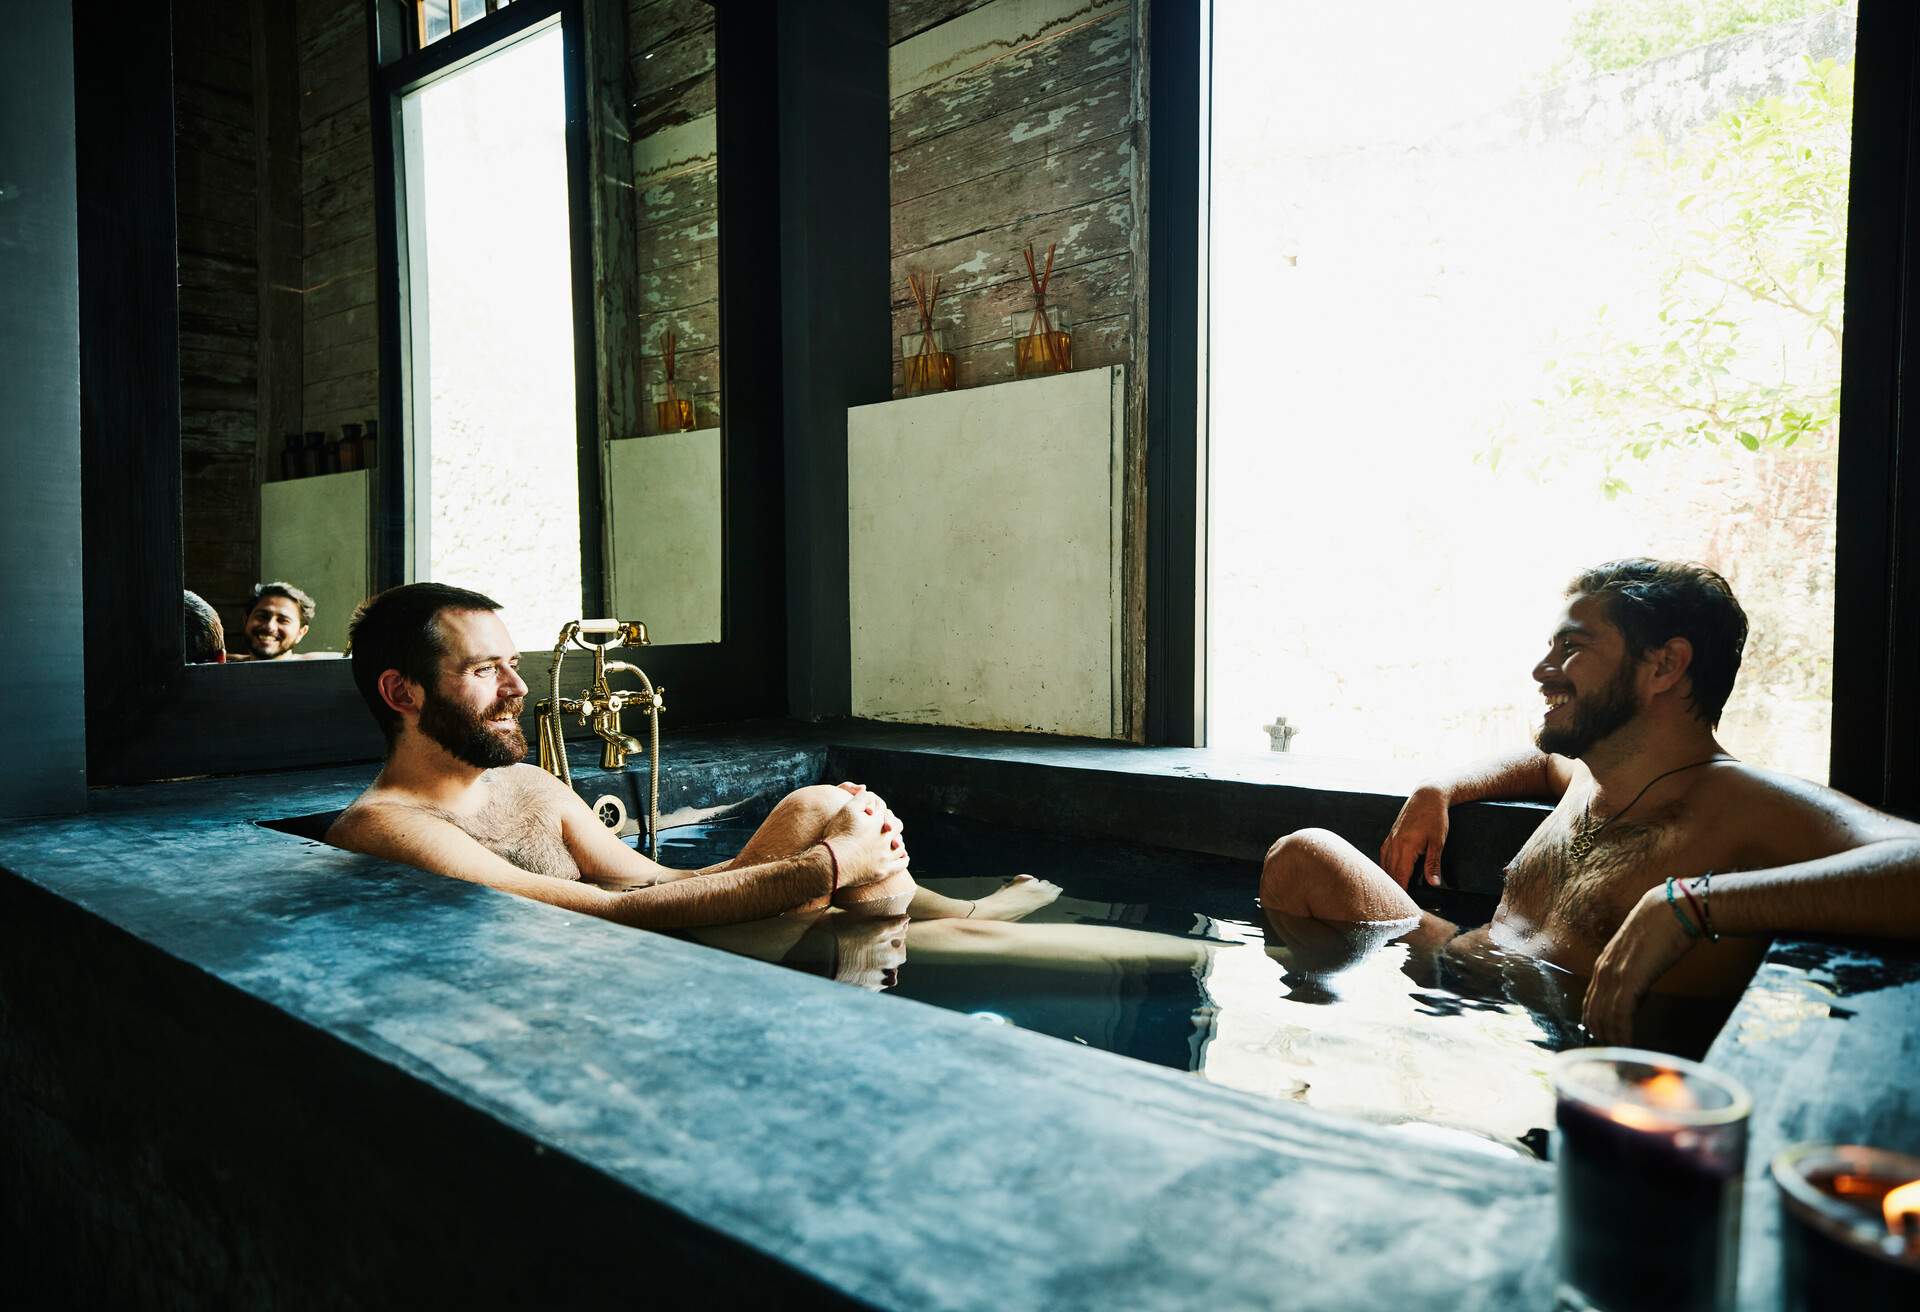 Two gay men relaxing in a hot tub.